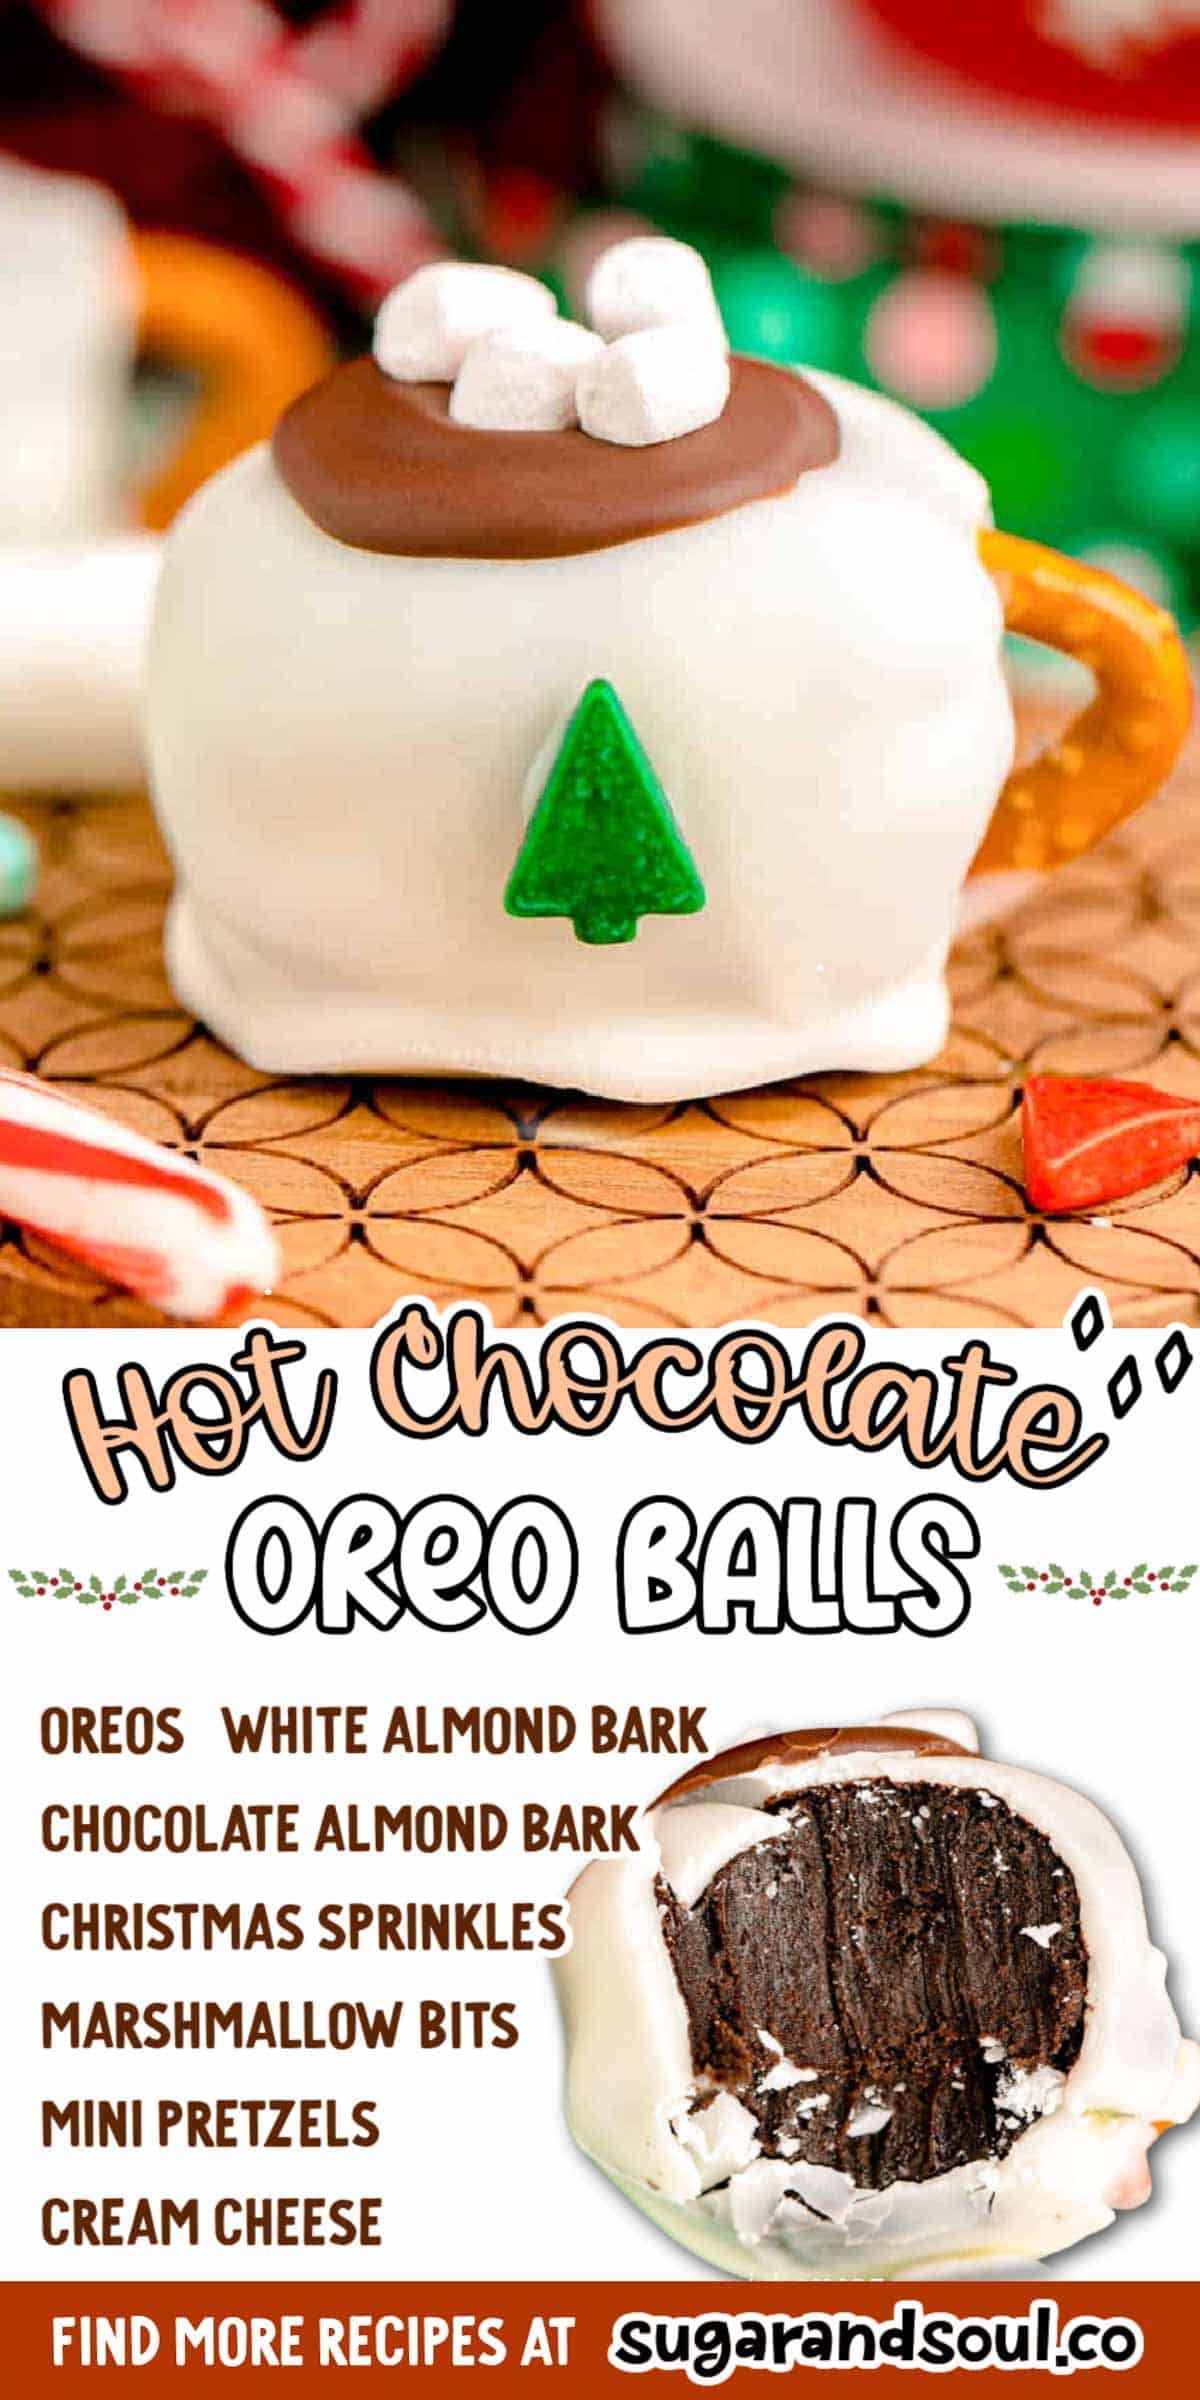 These Hot Chocolate Oreo Balls are a 3-ingredient irresistible truffle recipe that's then dressed up to look like a festive mug of hot chocolate! Makes almost 2 dozen no bake treats! via @sugarandsoulco